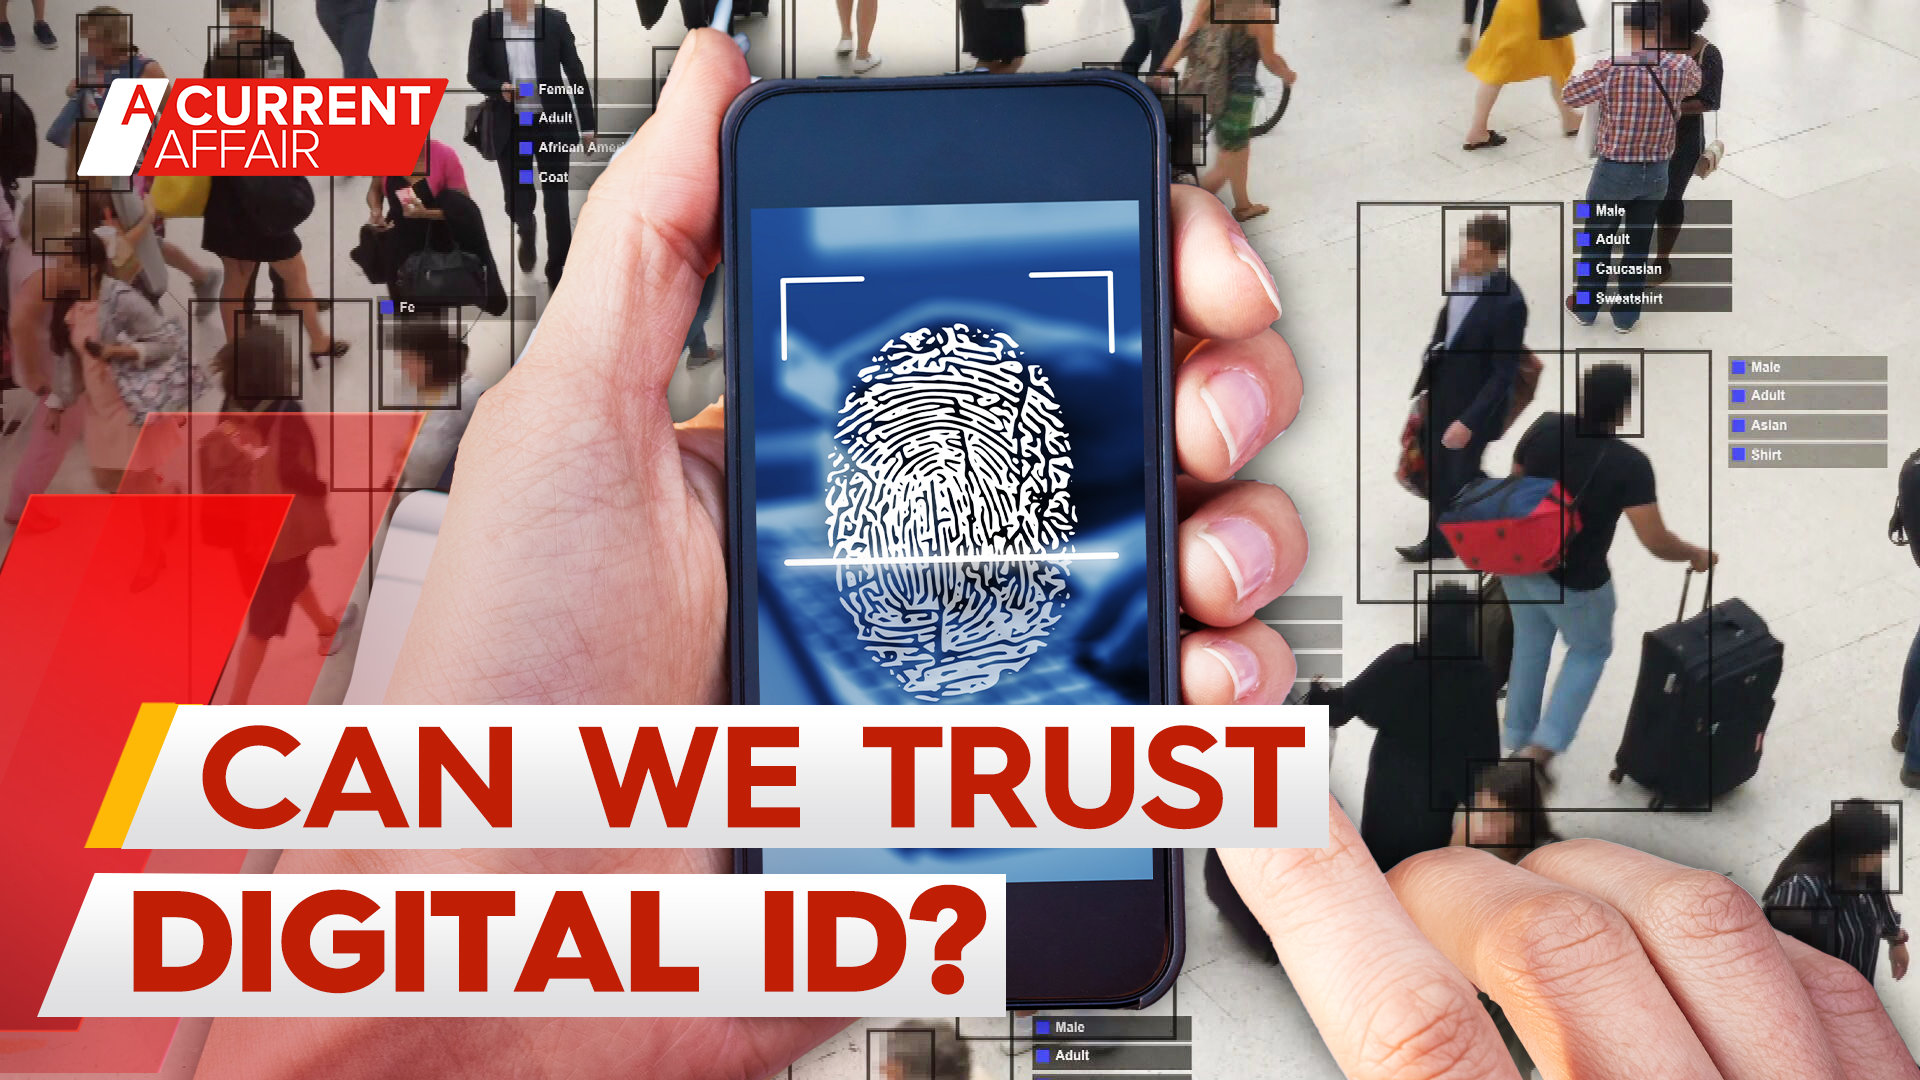 The government's plan to combine your personal details into one digital ID